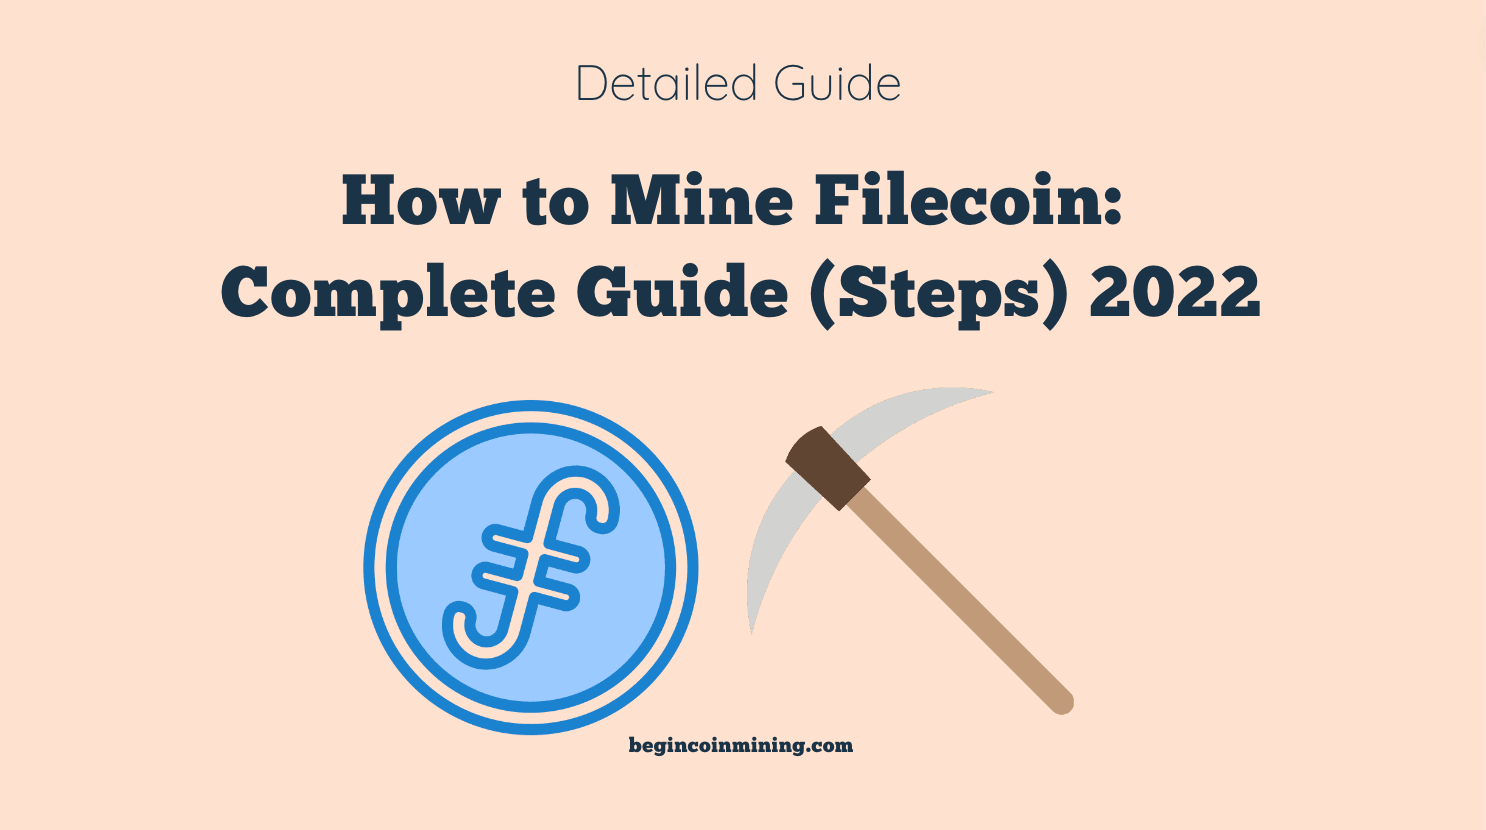 How to Mine Filecoin